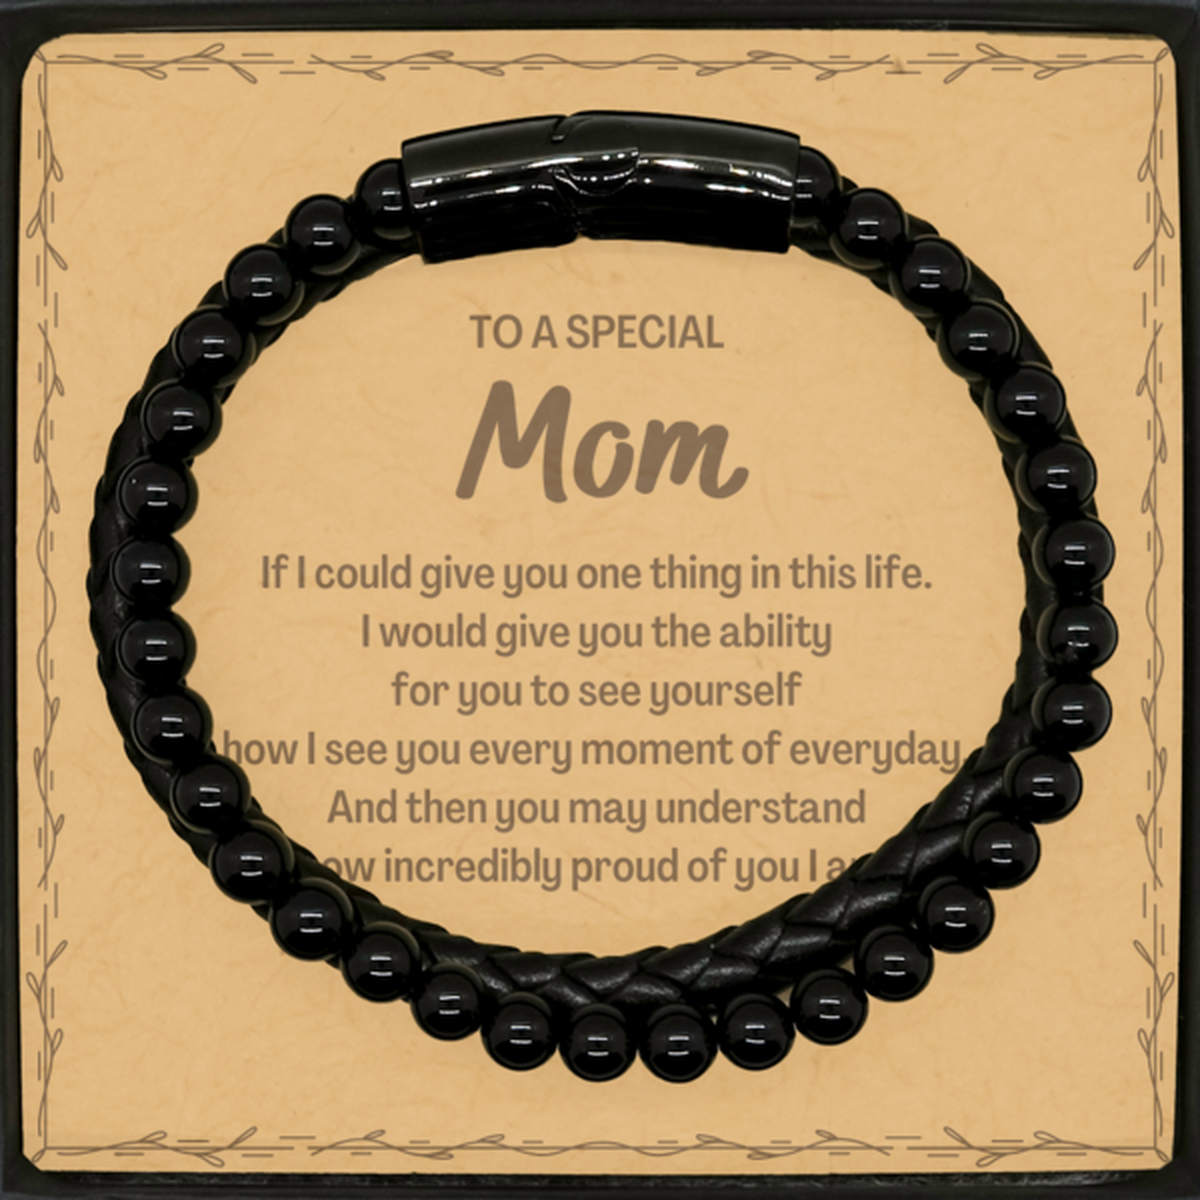 To My Mom Stone Leather Bracelets, Gifts For Mom Message Card, Inspirational Gifts for Christmas Birthday, Epic Gifts for Mom To A Special Mom how incredibly proud of you I am